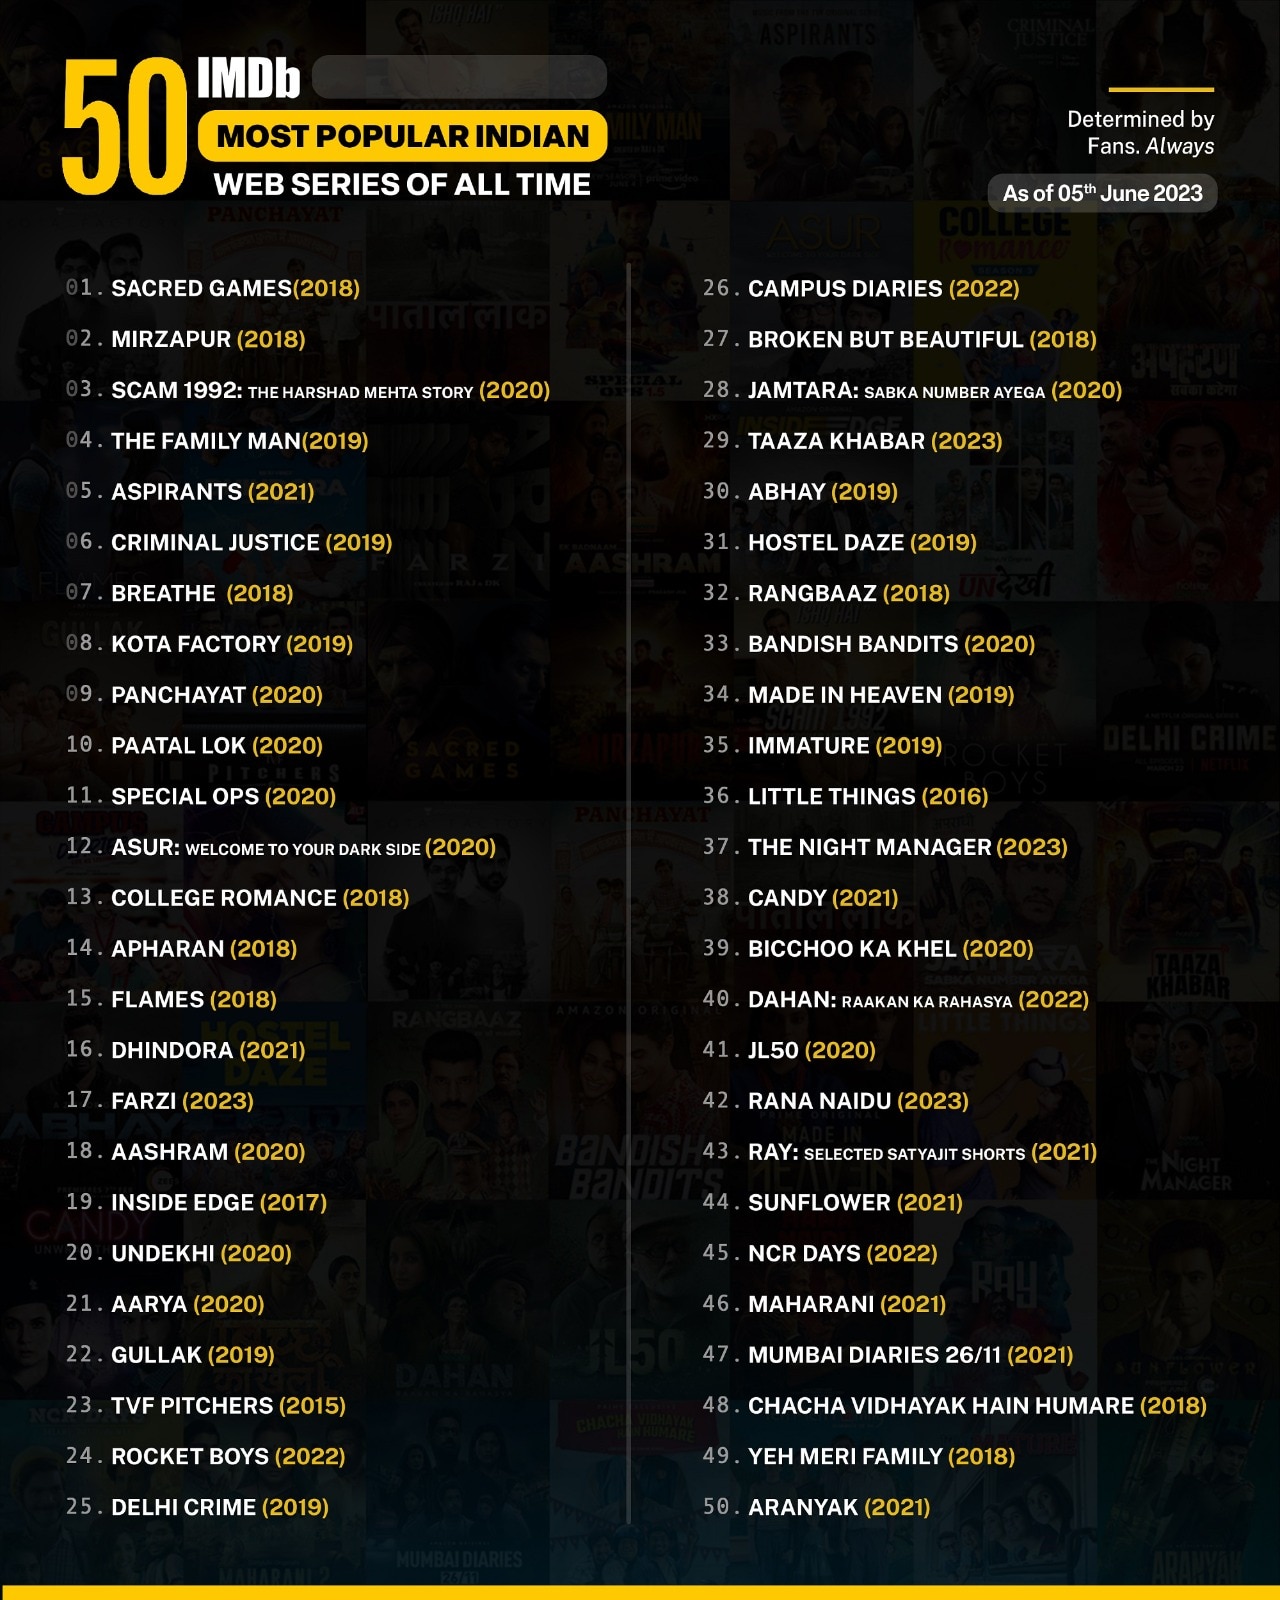 IMDb top 50 Indian Web Series know which series got the first rank